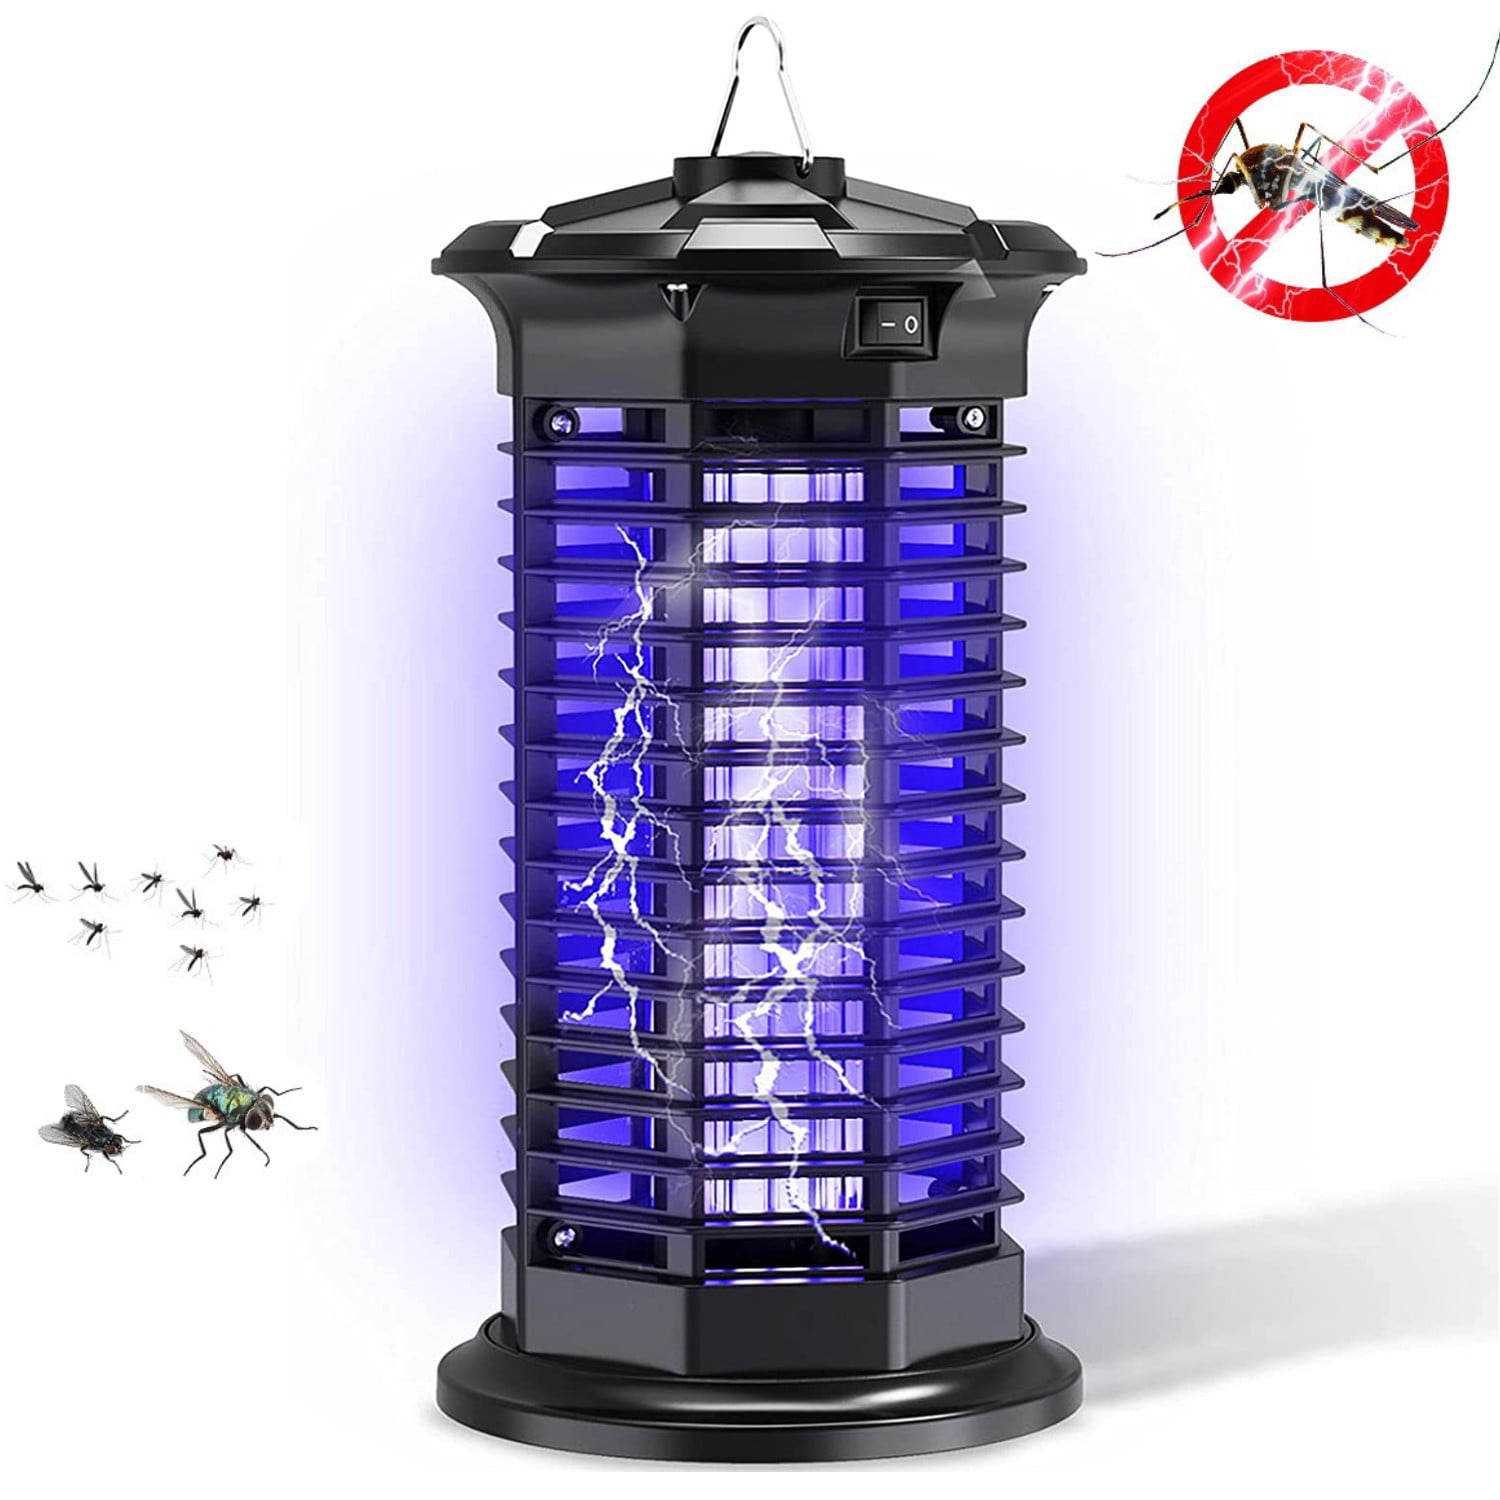 Details about   Power Killing Mosquitoes Lamp Portable LED Light Fly Bug Insect Trap Zapper Tool 